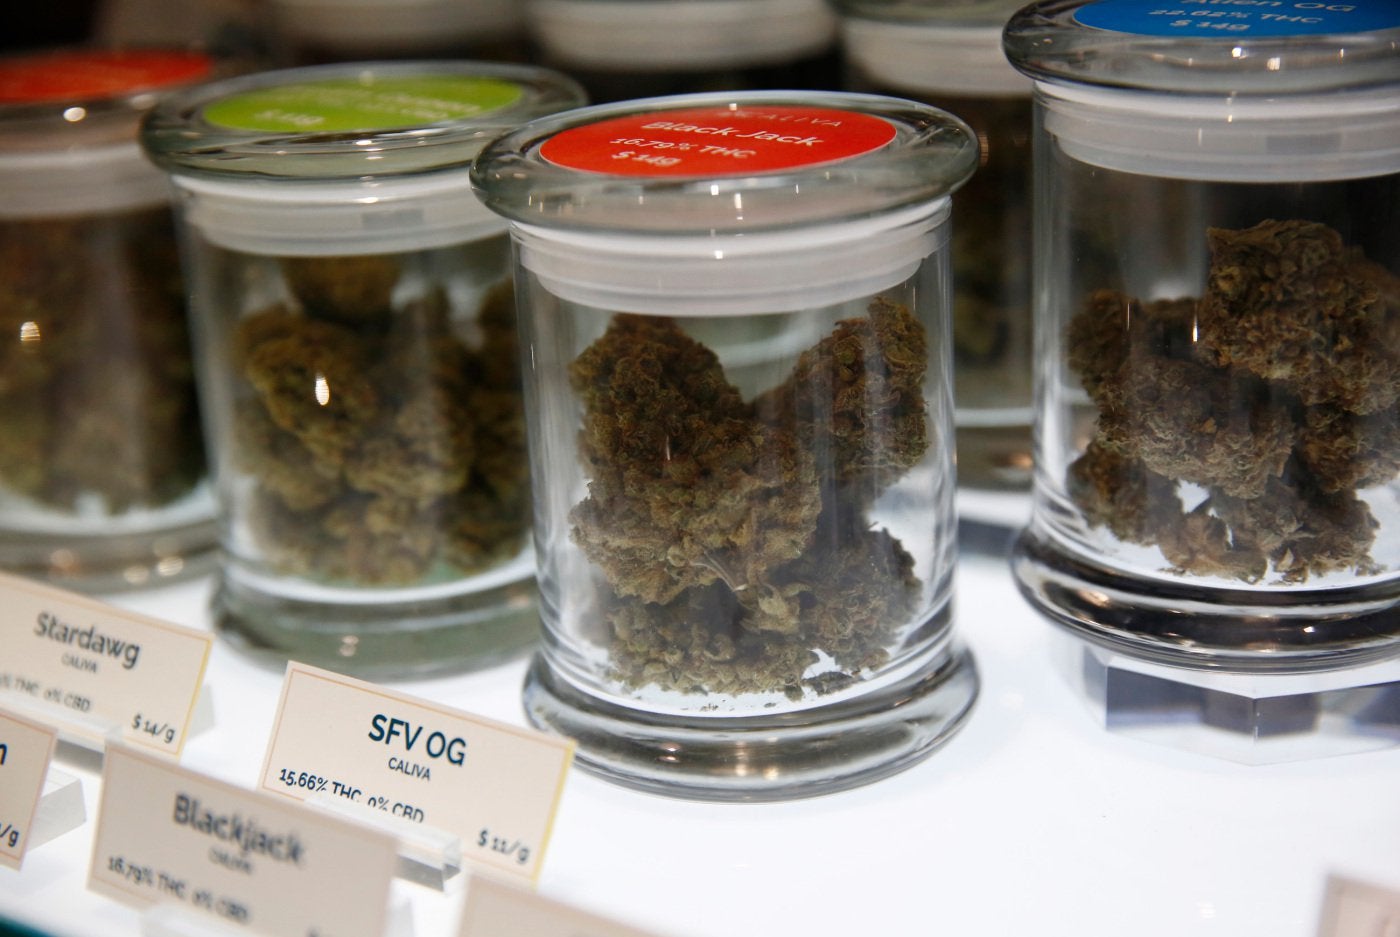 Security Guard at San Jose's largest dispensary tests positive for COVID-19 - The Cannabist